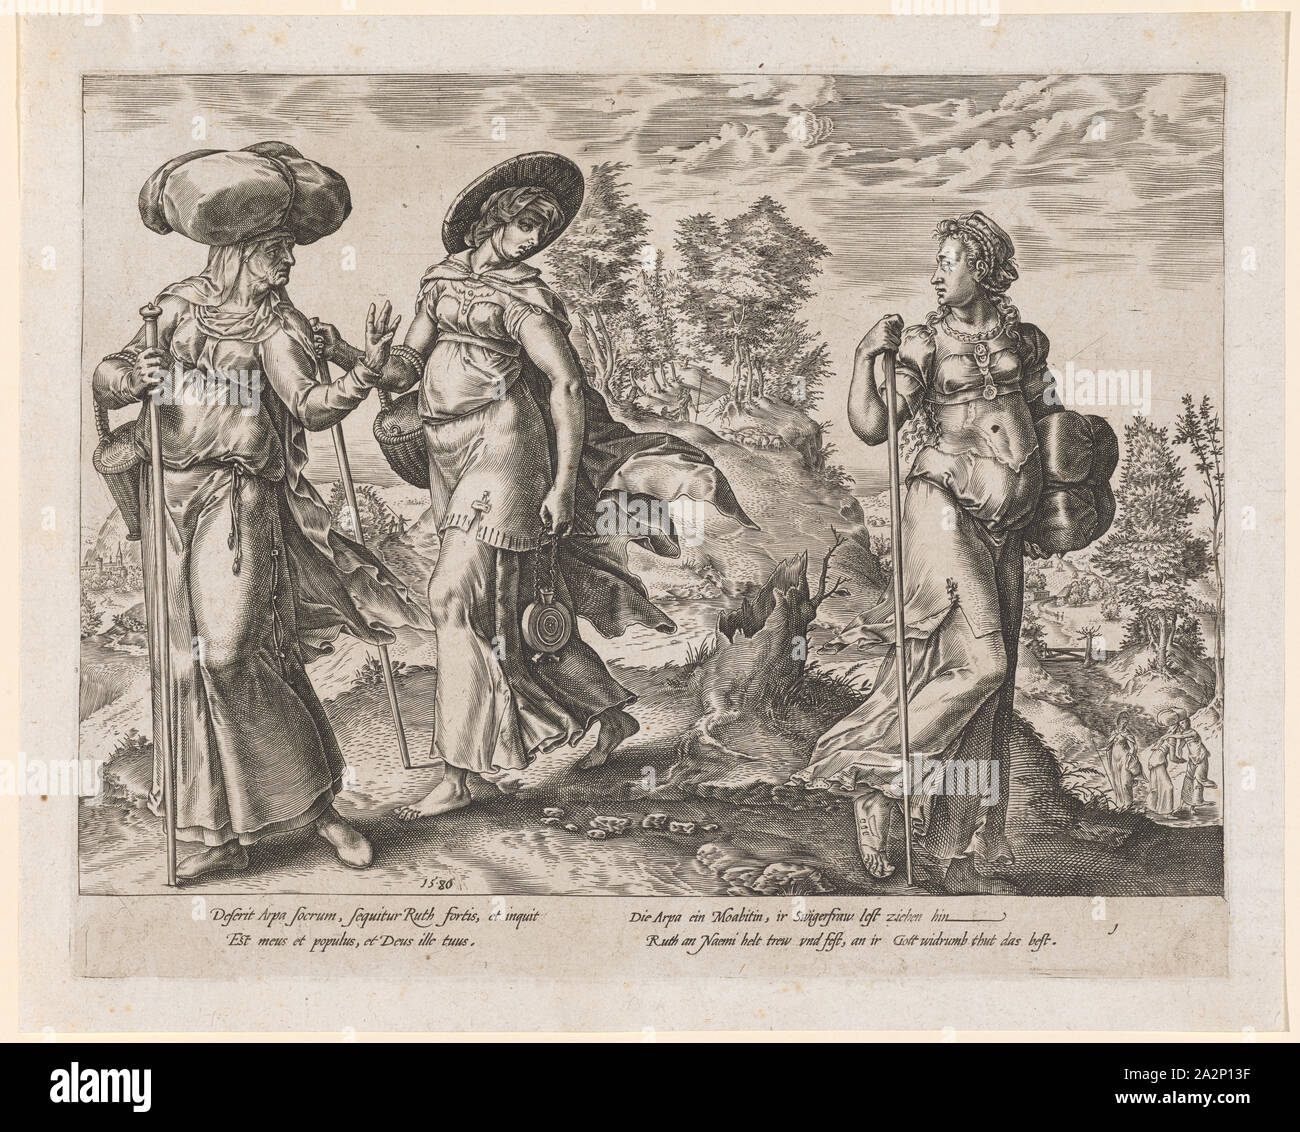 Orpas Separation of Noomi and Ruth, 1580, copperplate, plate: 21.9 x 27.8 cm |, Leaf: 24.7 x 30.6 cm, U.M. l., dated: 15.80, Deserit Arpa socrum, sequitur Ruth fortis, et inquit, Est meus et populus, et Deus illu tuus., The Arpa a Moabitin, ir swigerfraw lend, Ruth Naemi trew and cling to ir god widrumb does the best, u, ., r., numbered: 1, Hendrick Goltzius, Mühlbrecht 1558–1617 Haarlem Stock Photo